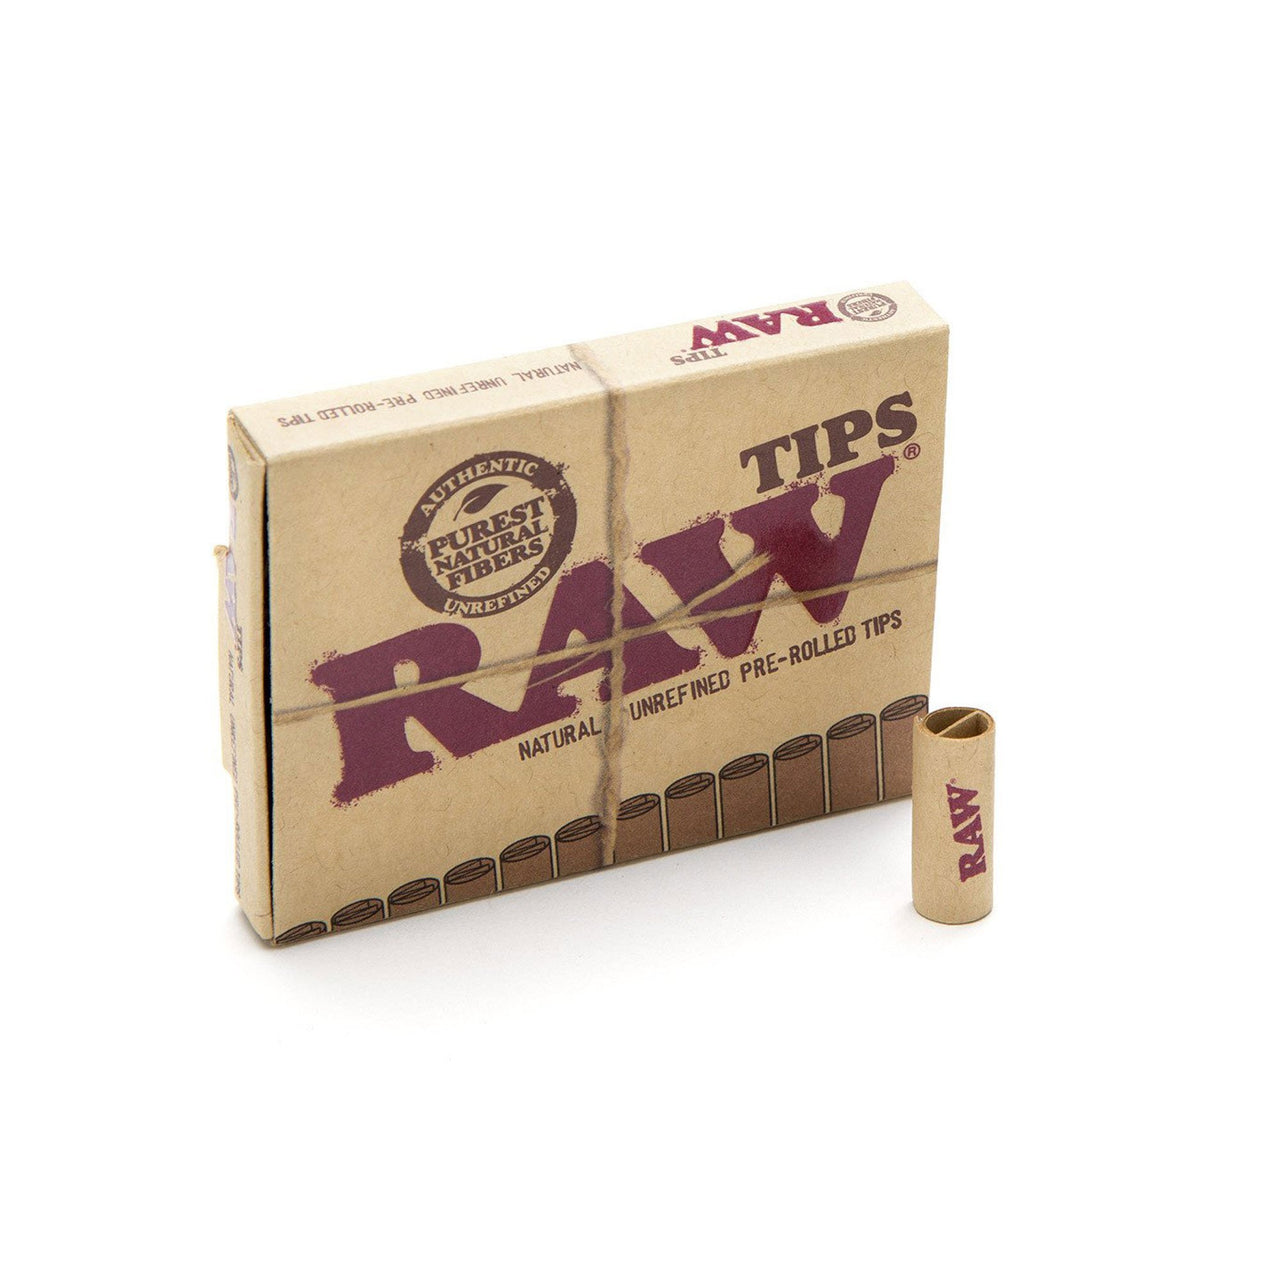 RAW Tips Original Roll Up Tips Full Box | 50 Packs | 50 RAW Tips per Pack |  Naturally Slow Burning Tips Made for Re-Use